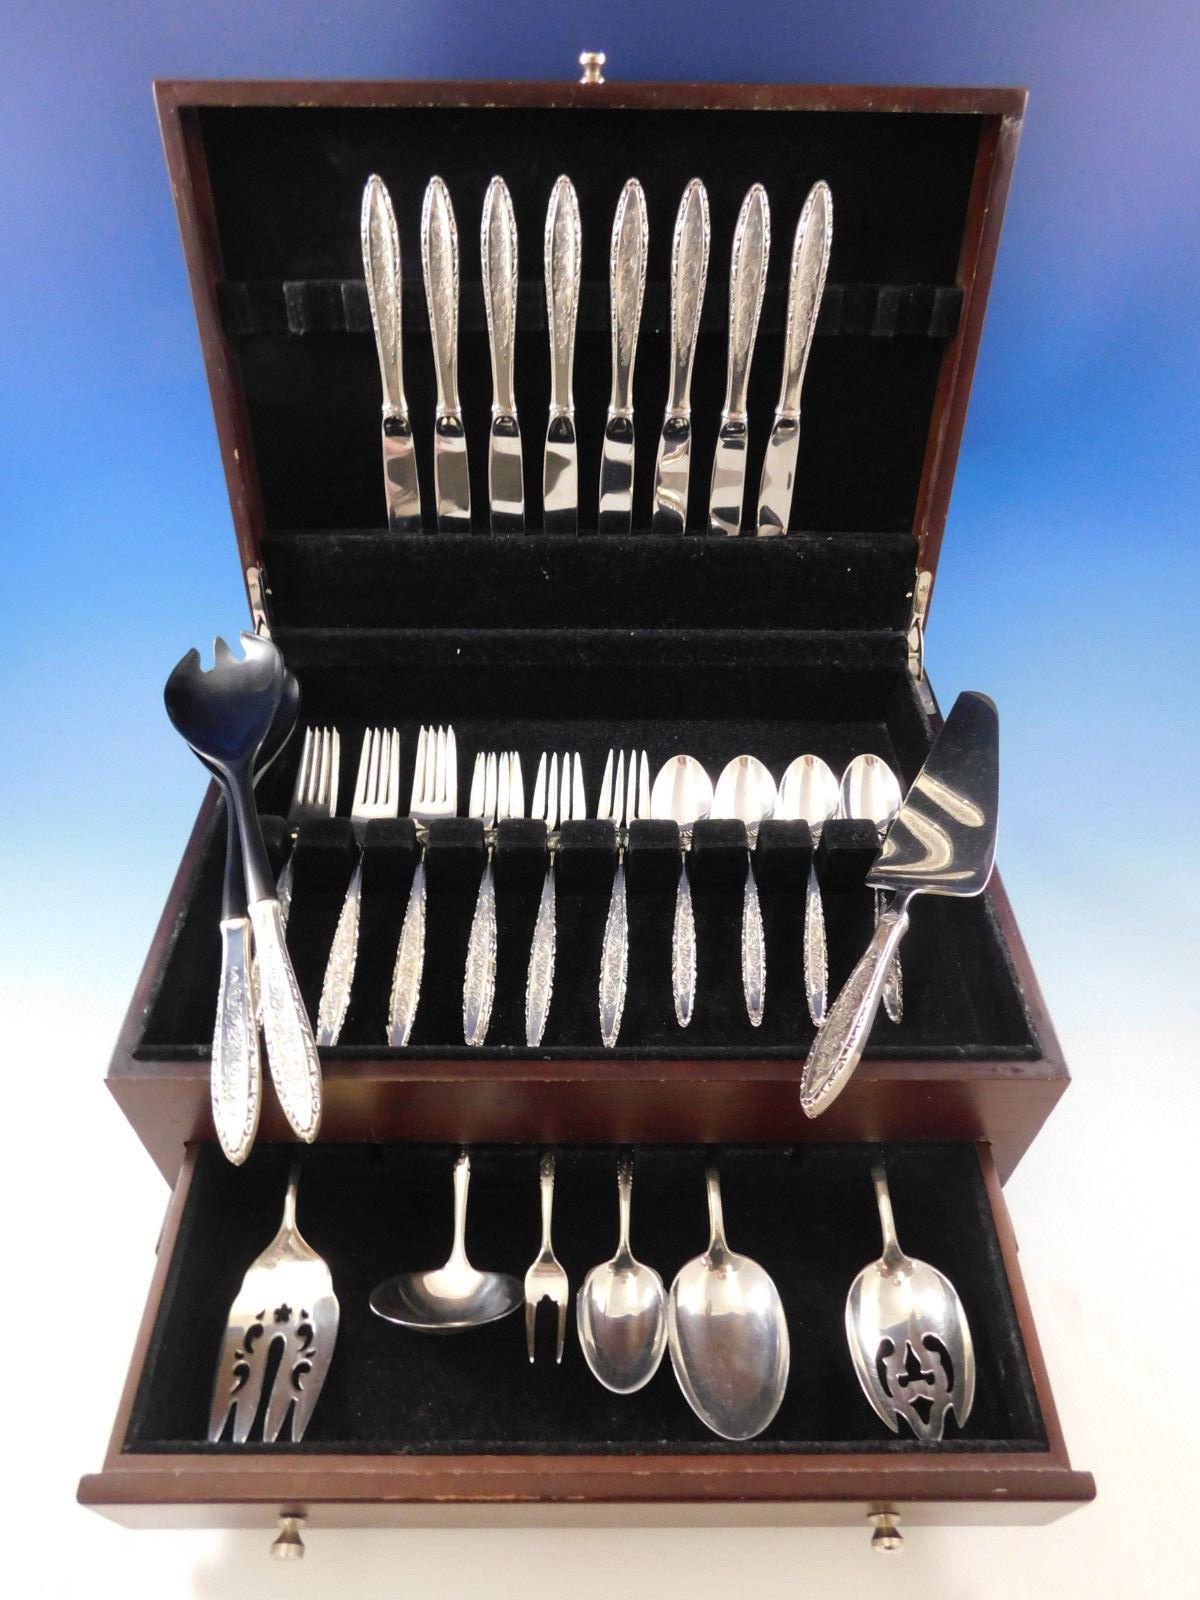 Floral Lace by Lunt sterling silver flatware set, 41 pieces. This set includes:

Eight knives, 9